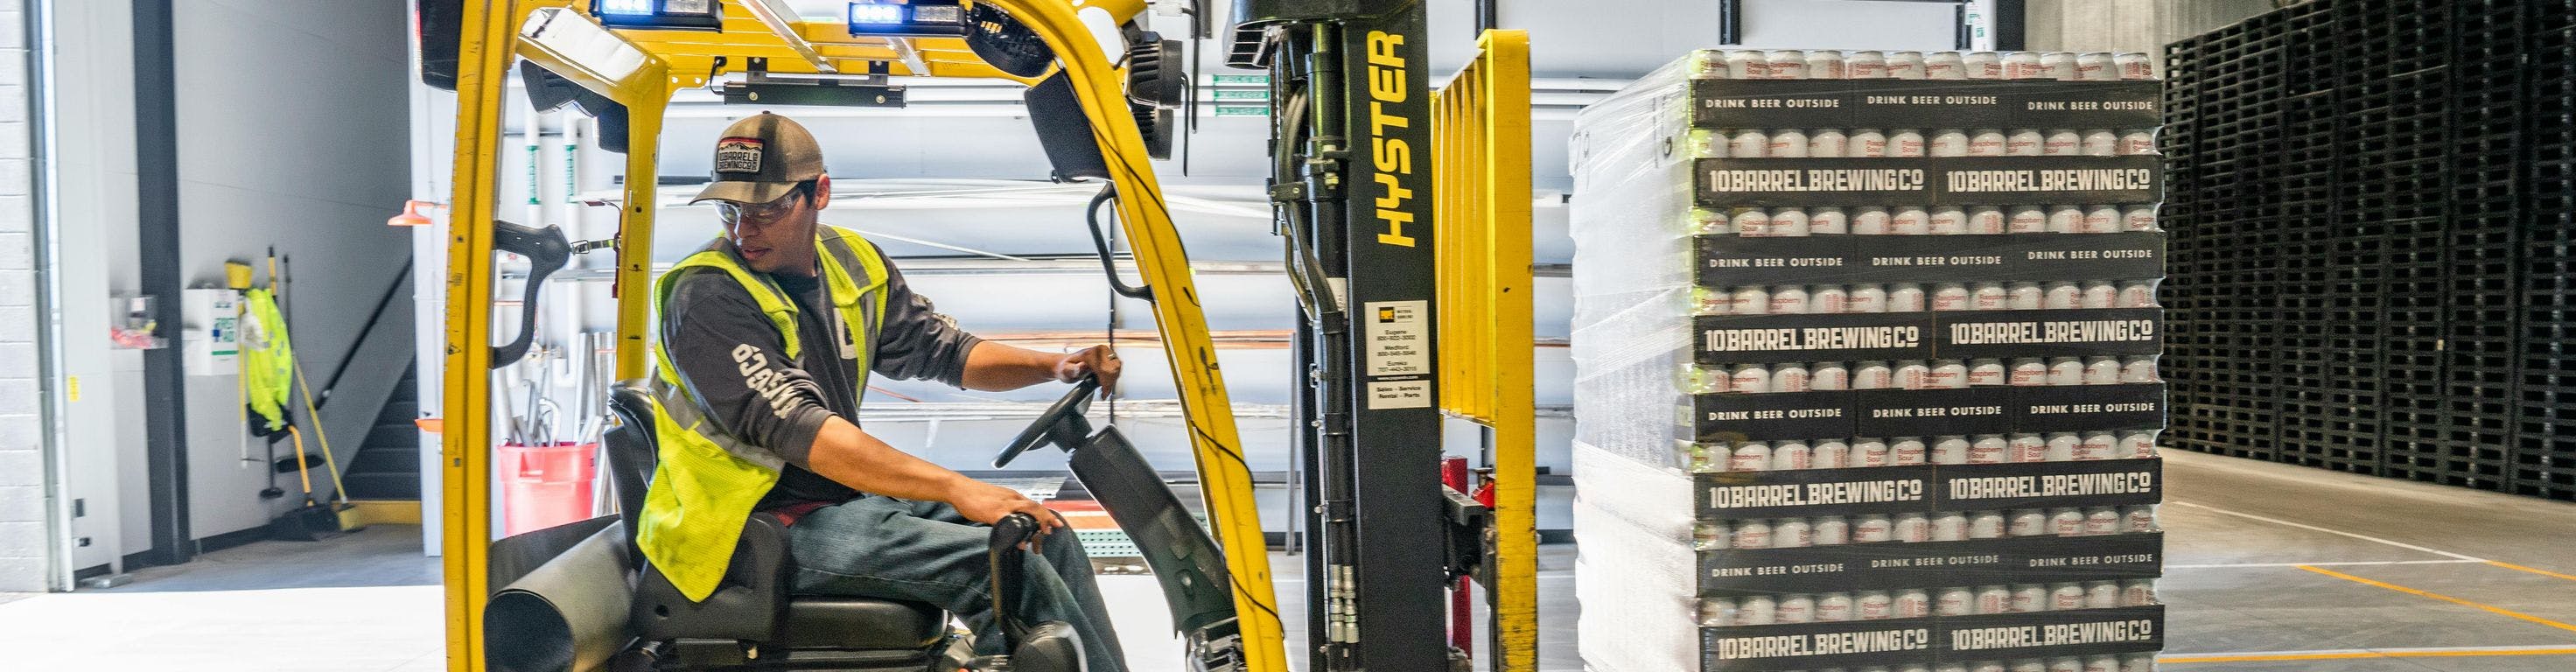 Man driving yellow forklift with a pallet full of cans in a warehouse